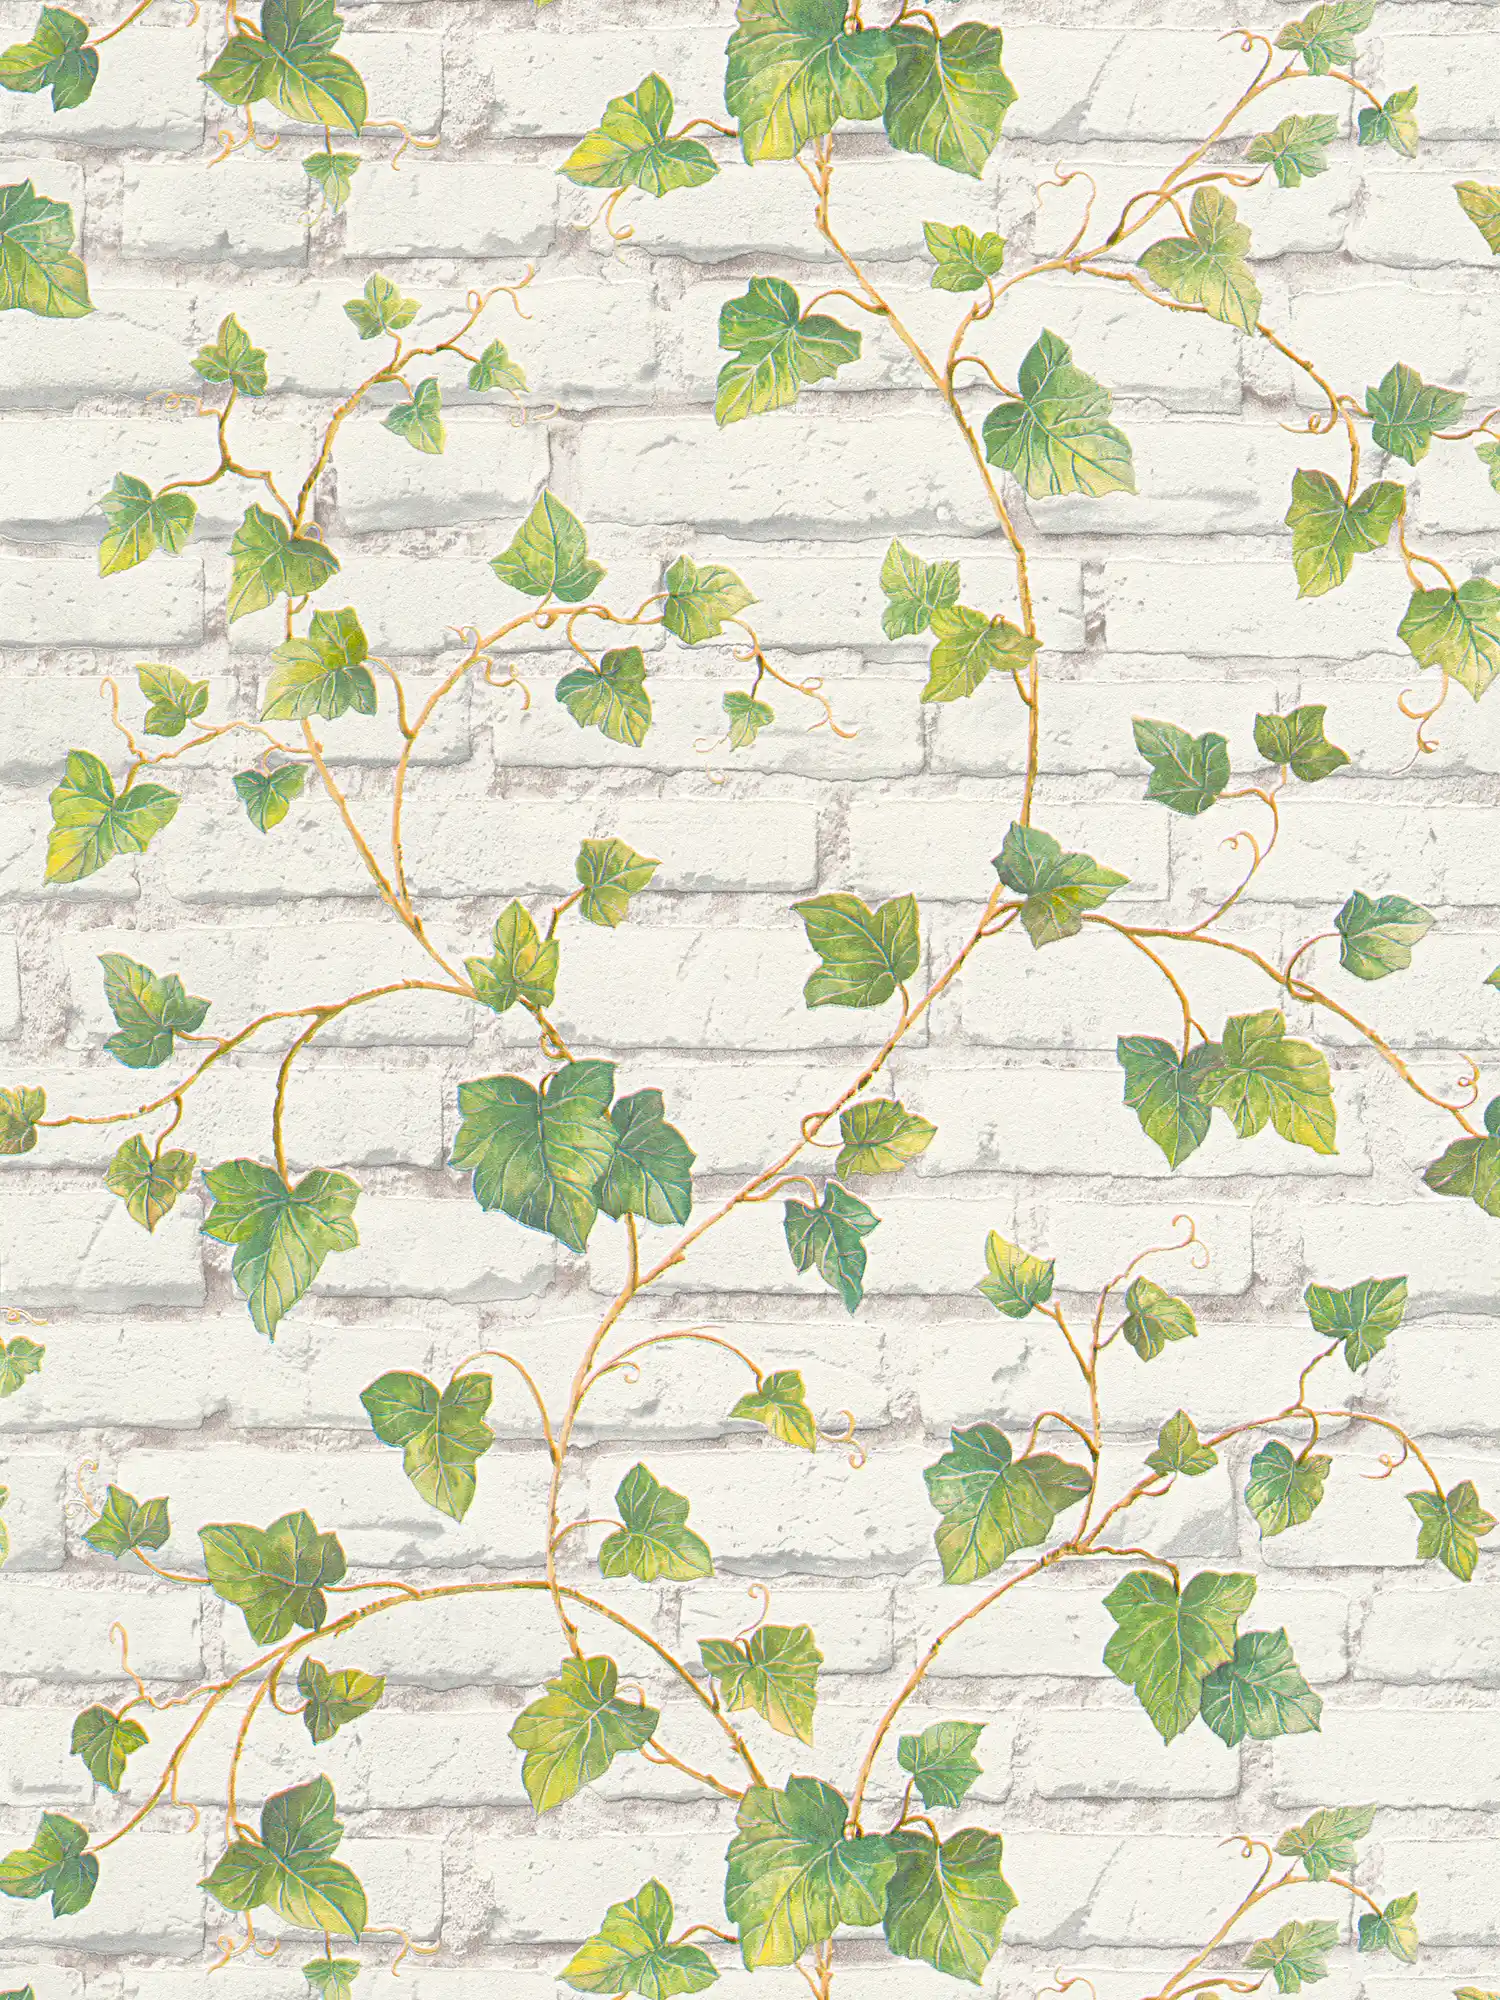 Motif wallpaper with white brick wall and ivy vines - green, white, brown
